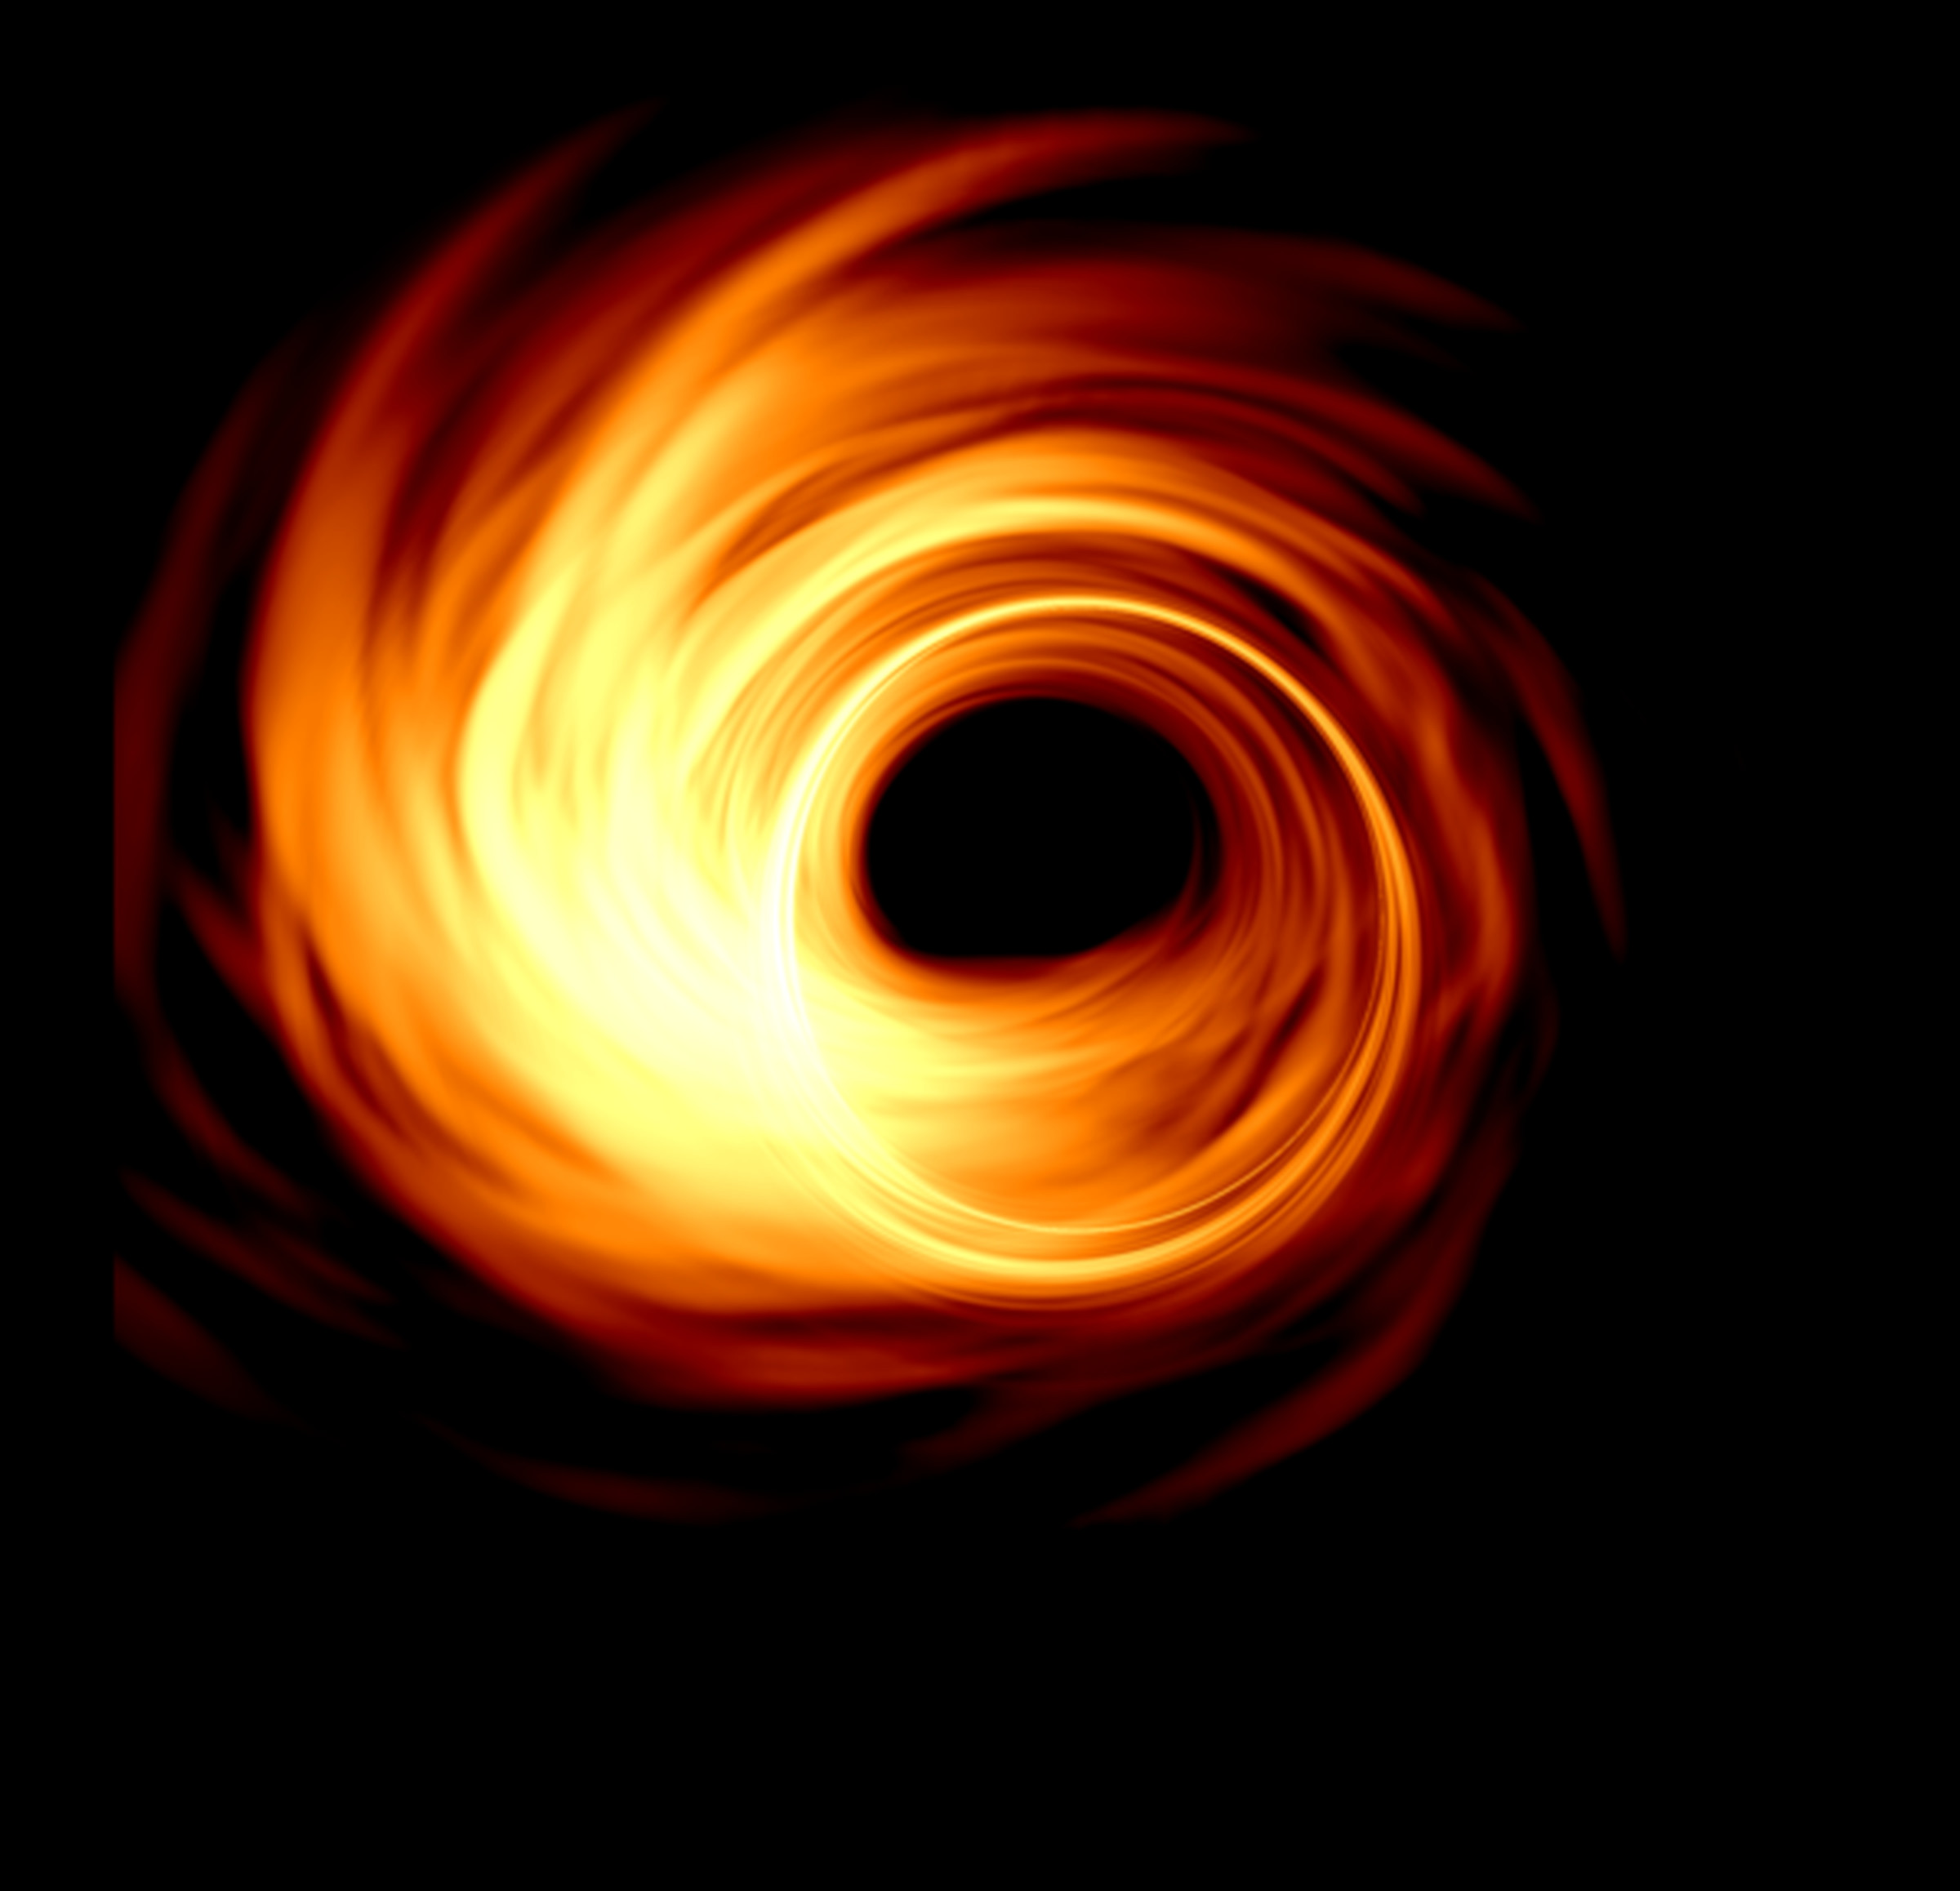 A simulation of the swirling disc of gas and dust around the black hole.